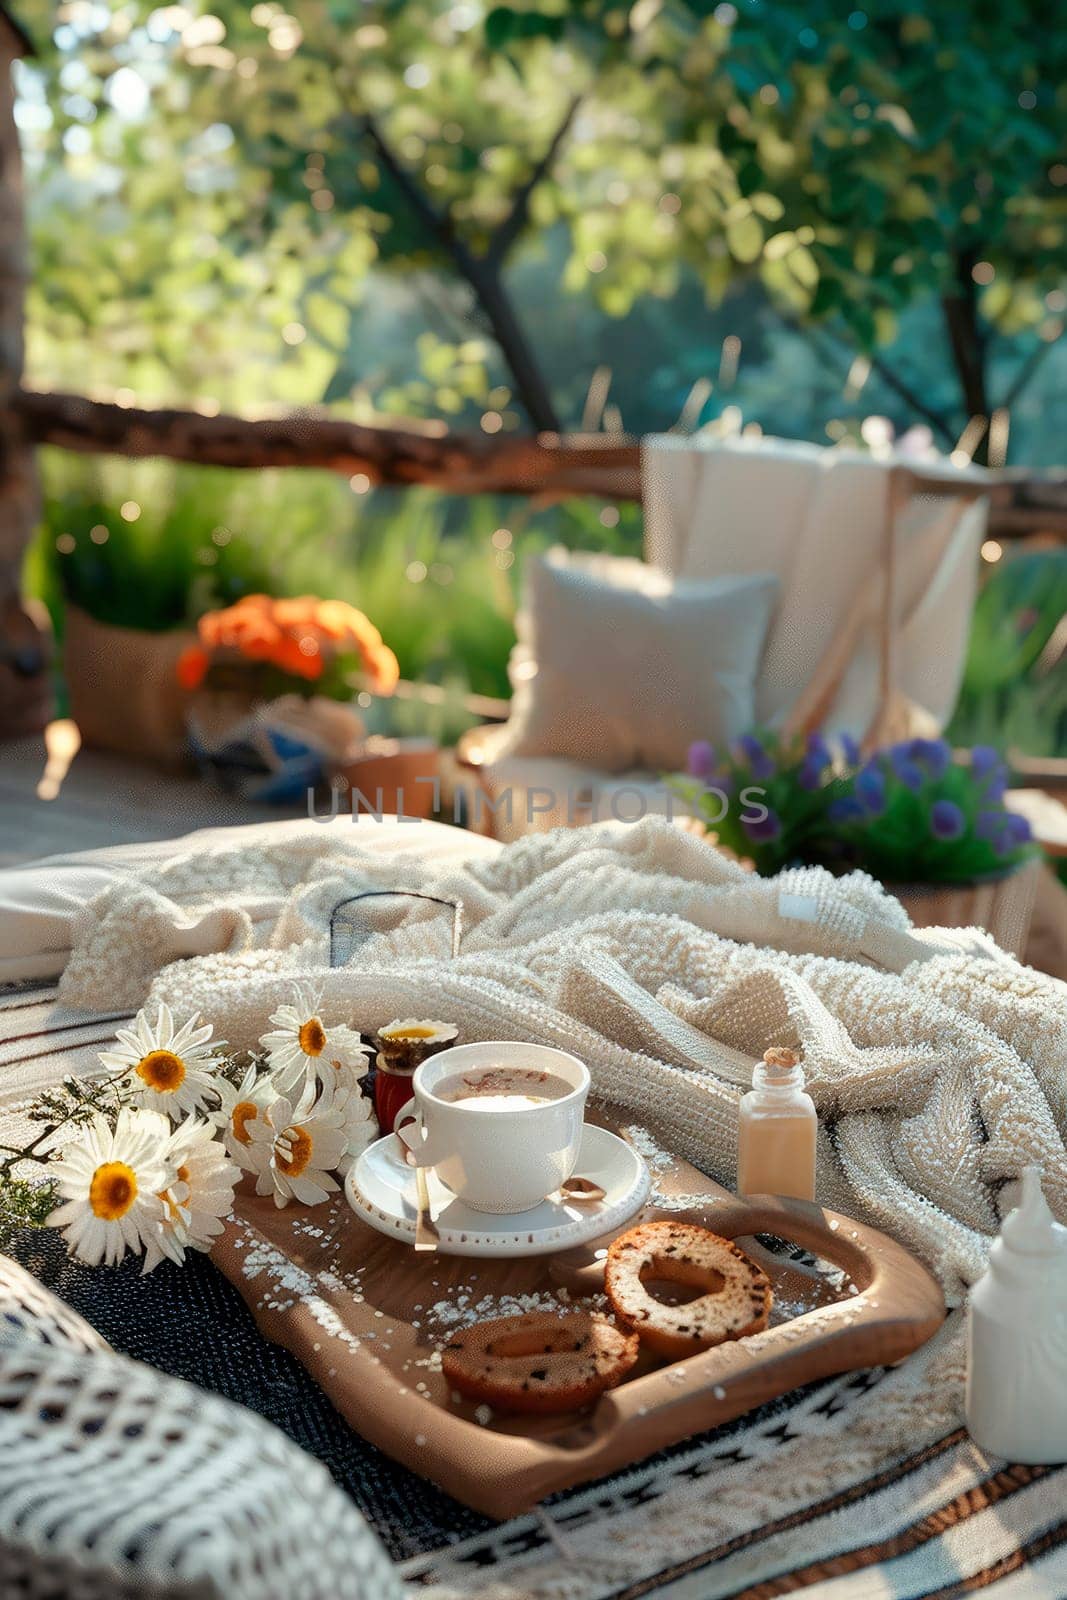 breakfast on the table in the garden. selective focus. by yanadjana